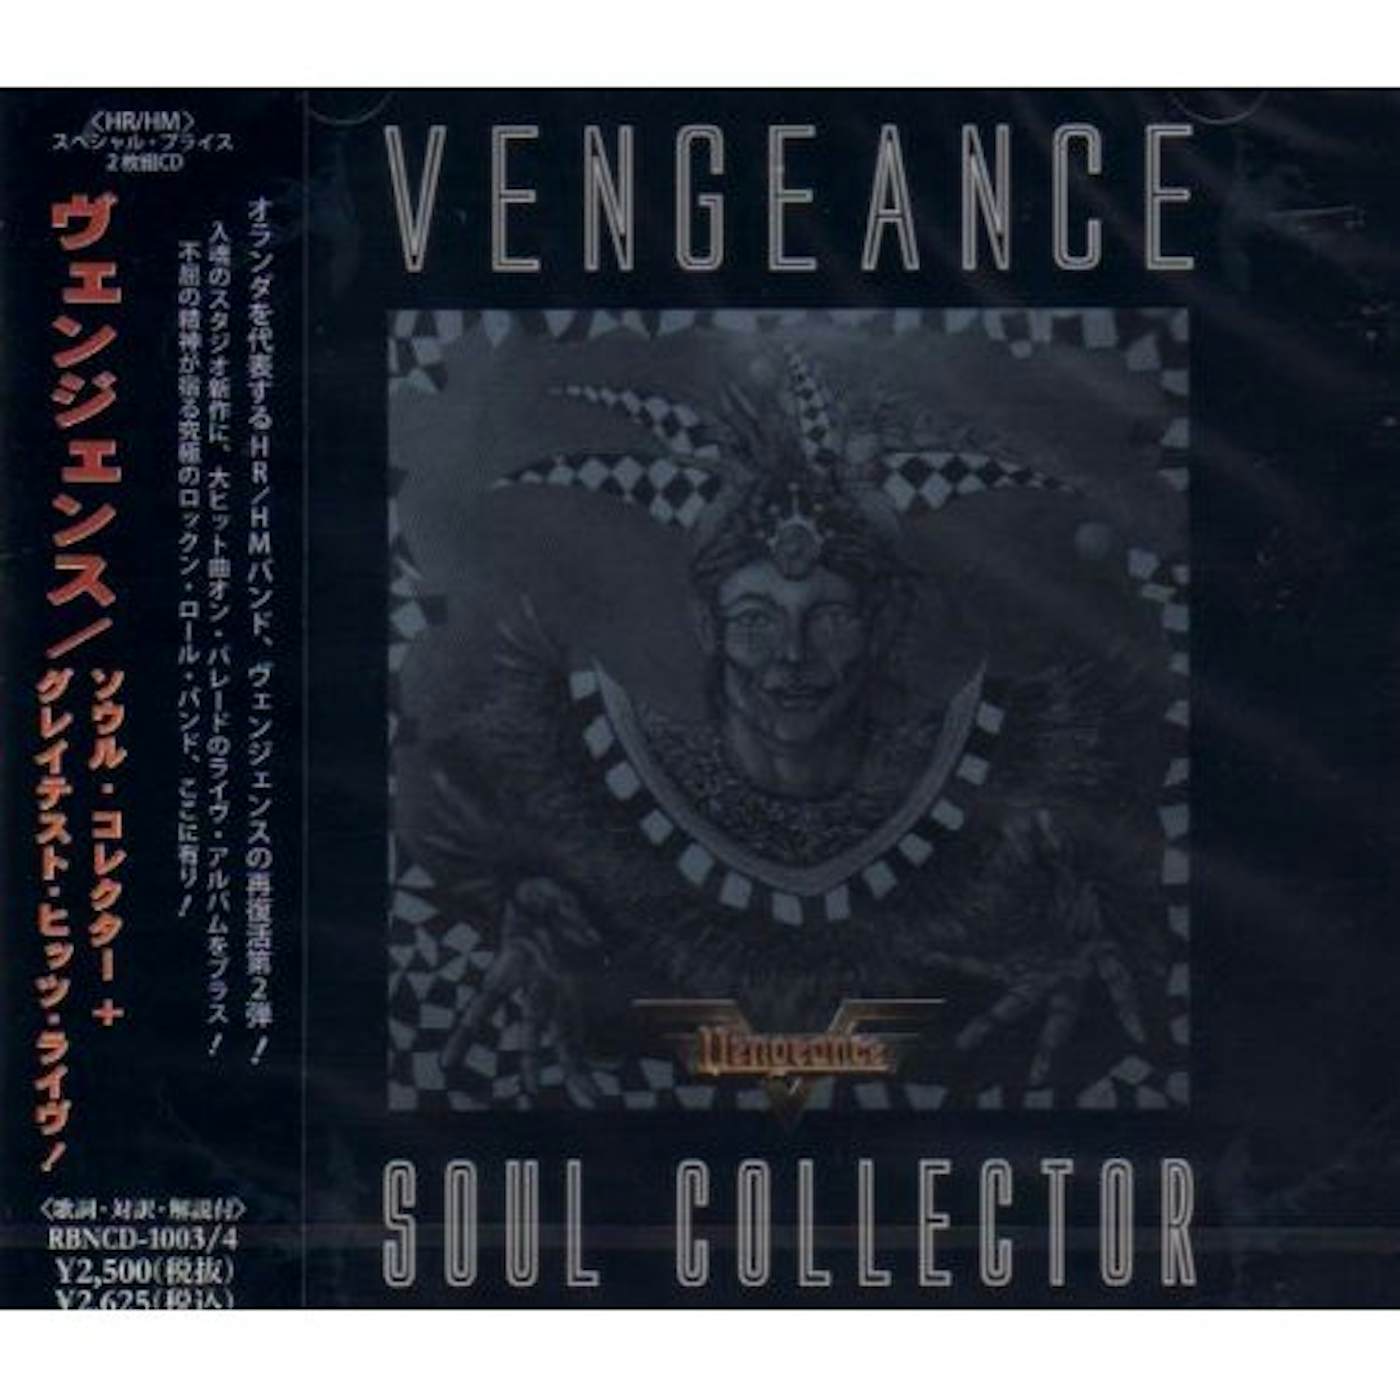 Vengeance SOUL COLLECTOR / GREATEST HITS CD